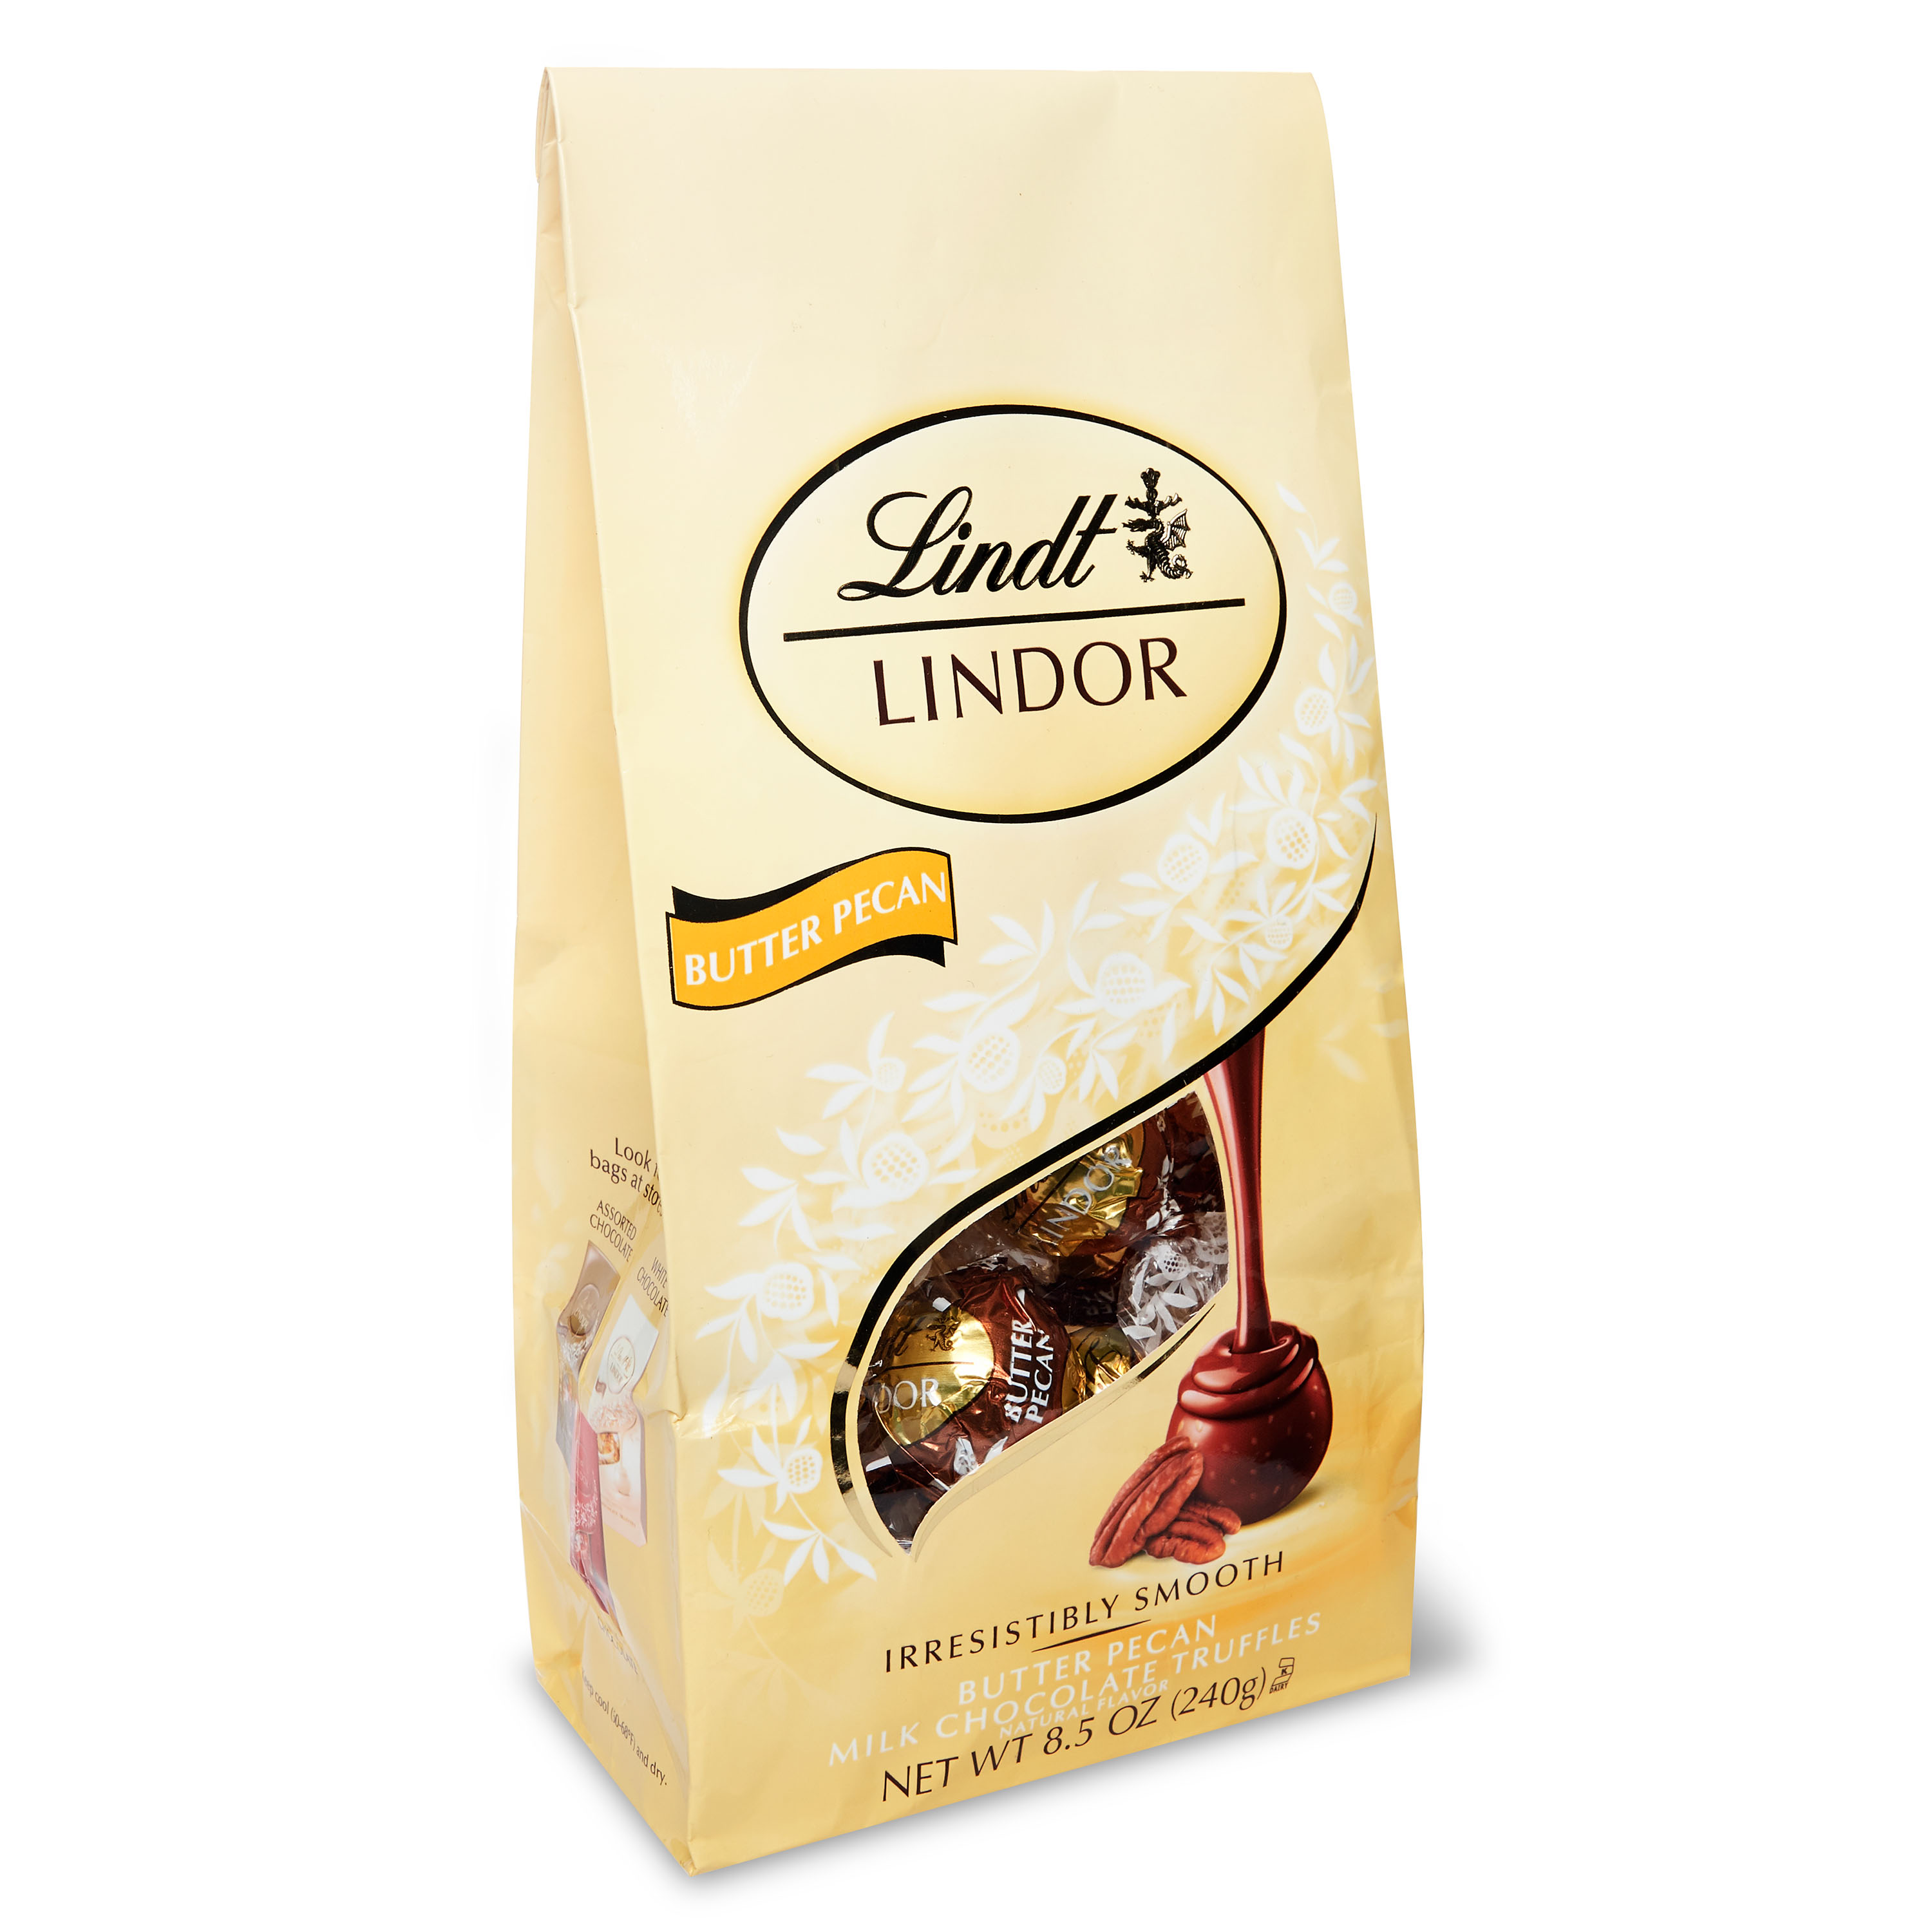 Lindt Lindor Butter Pecan Milk Chocolate Truffles Nutrition And Ingredients Greenchoice 4459